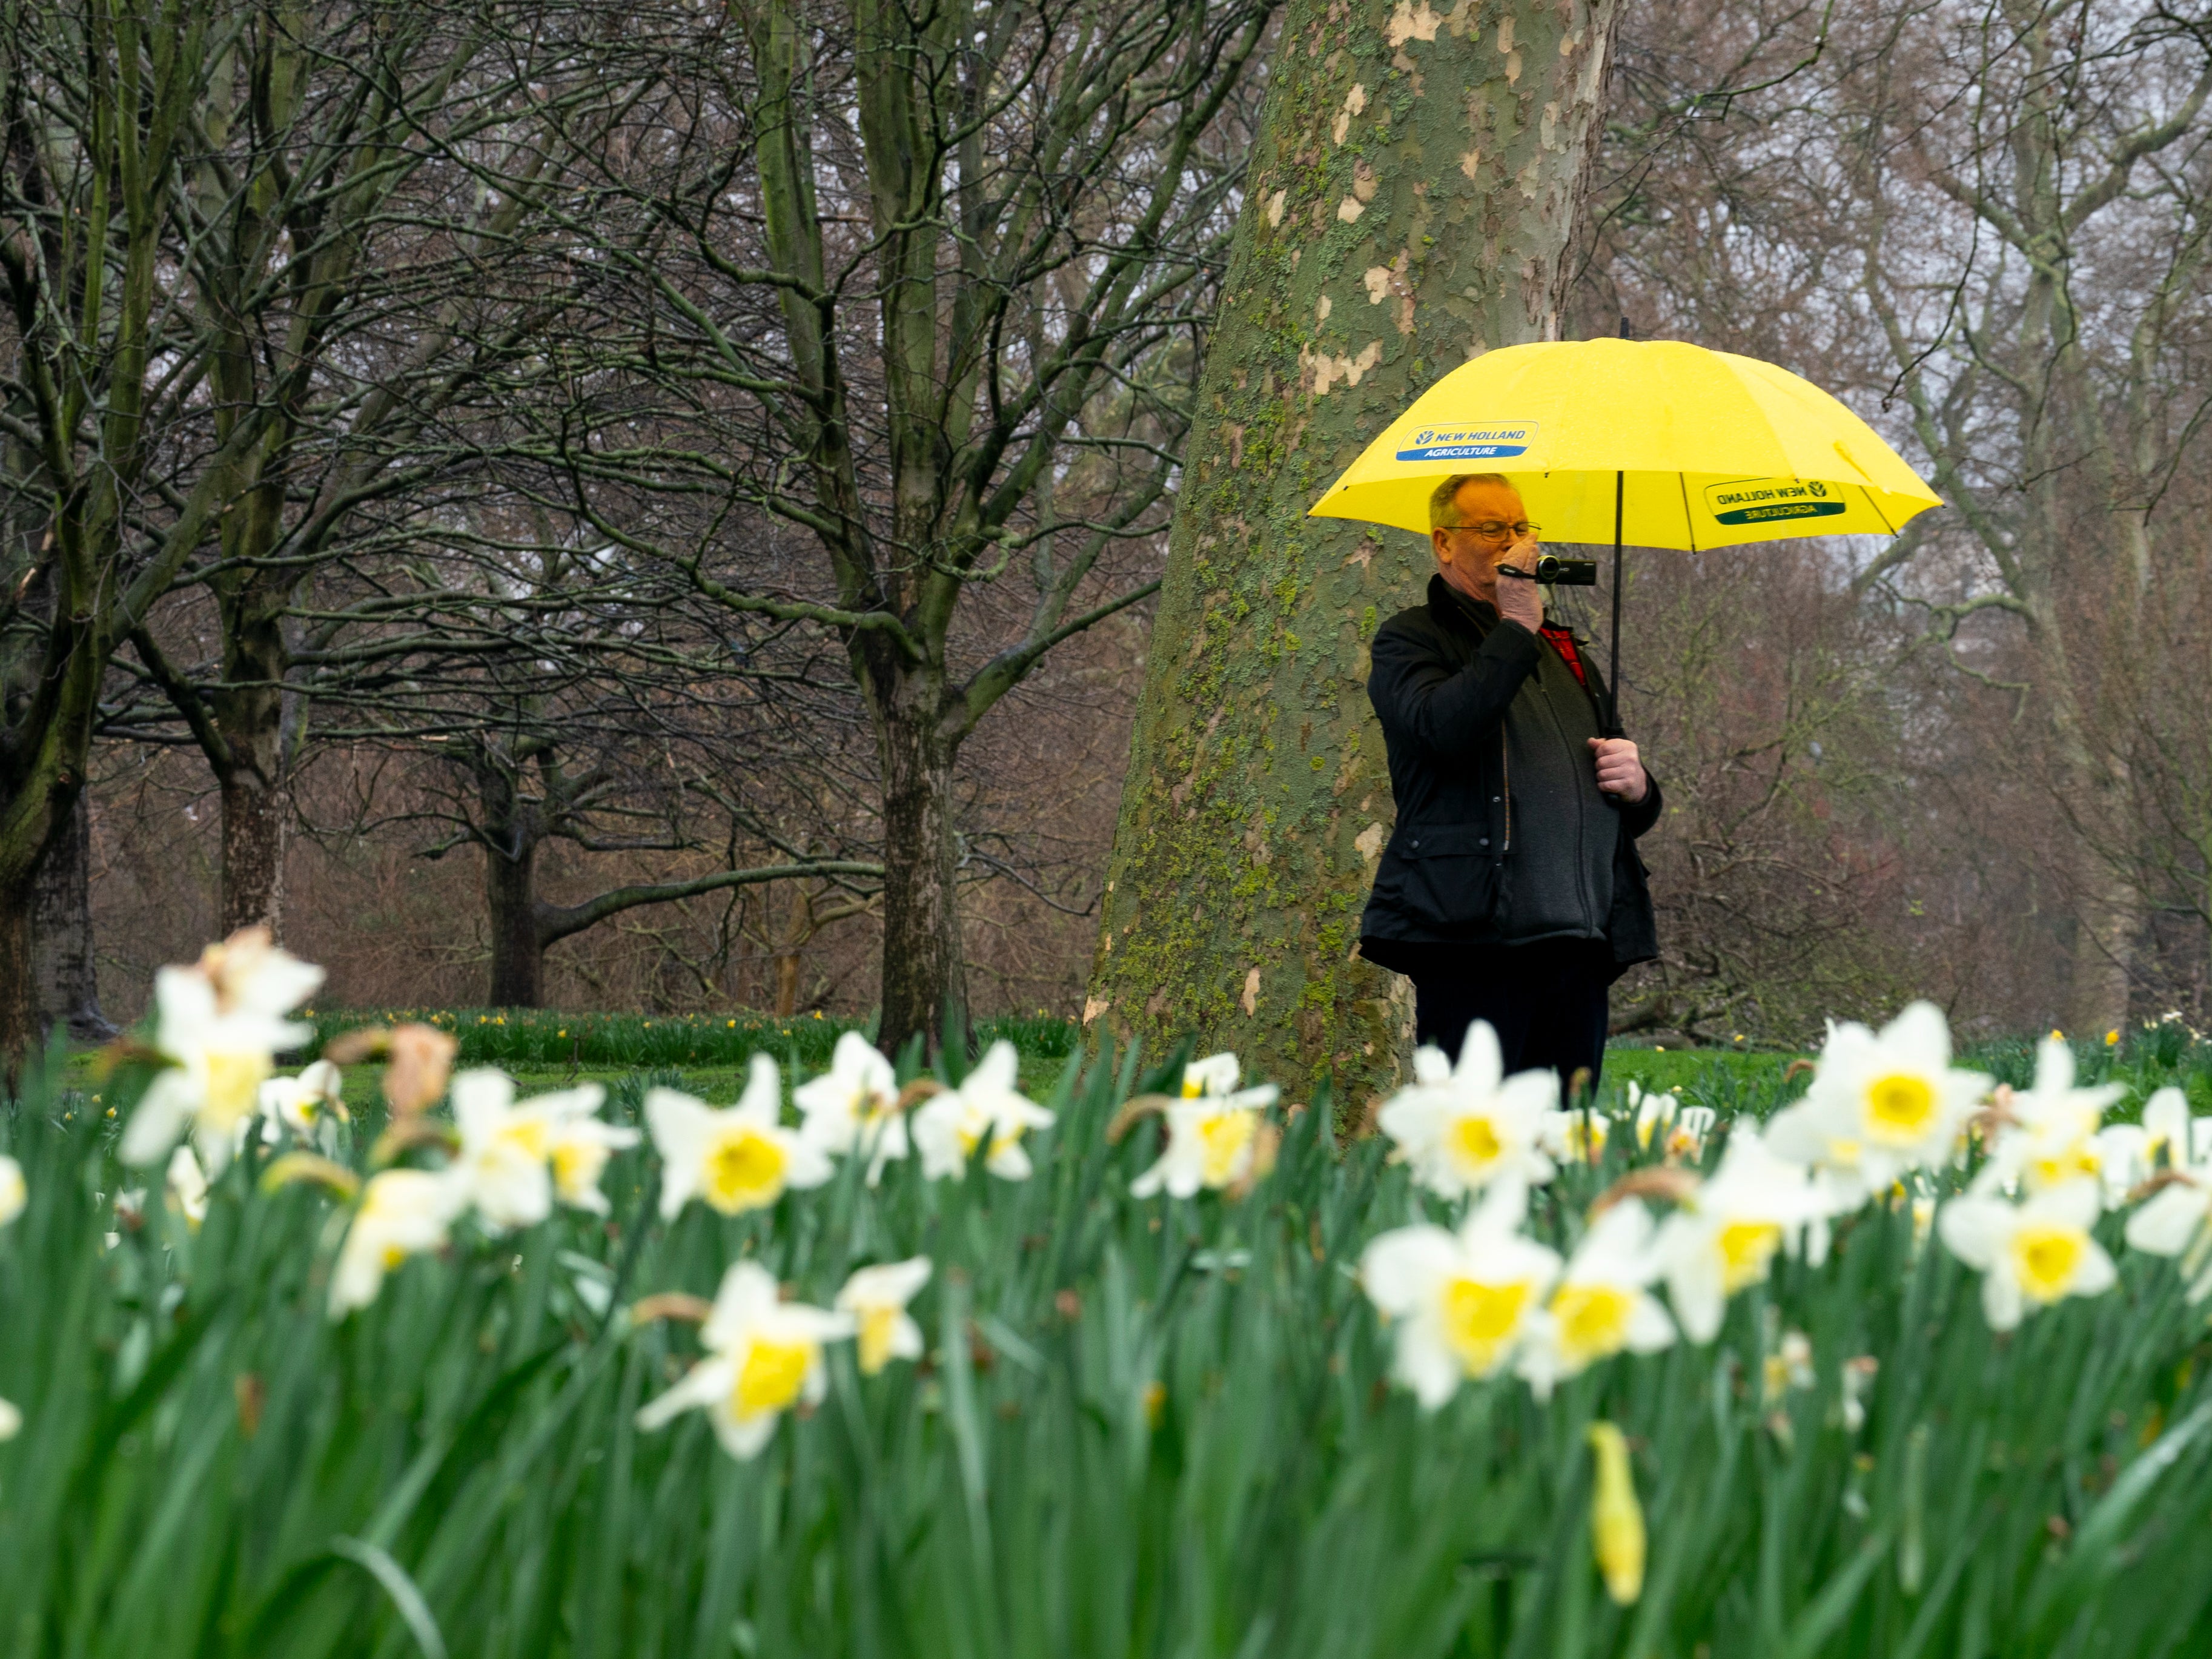 Spring daffodils are almost over but the rain has been persistent